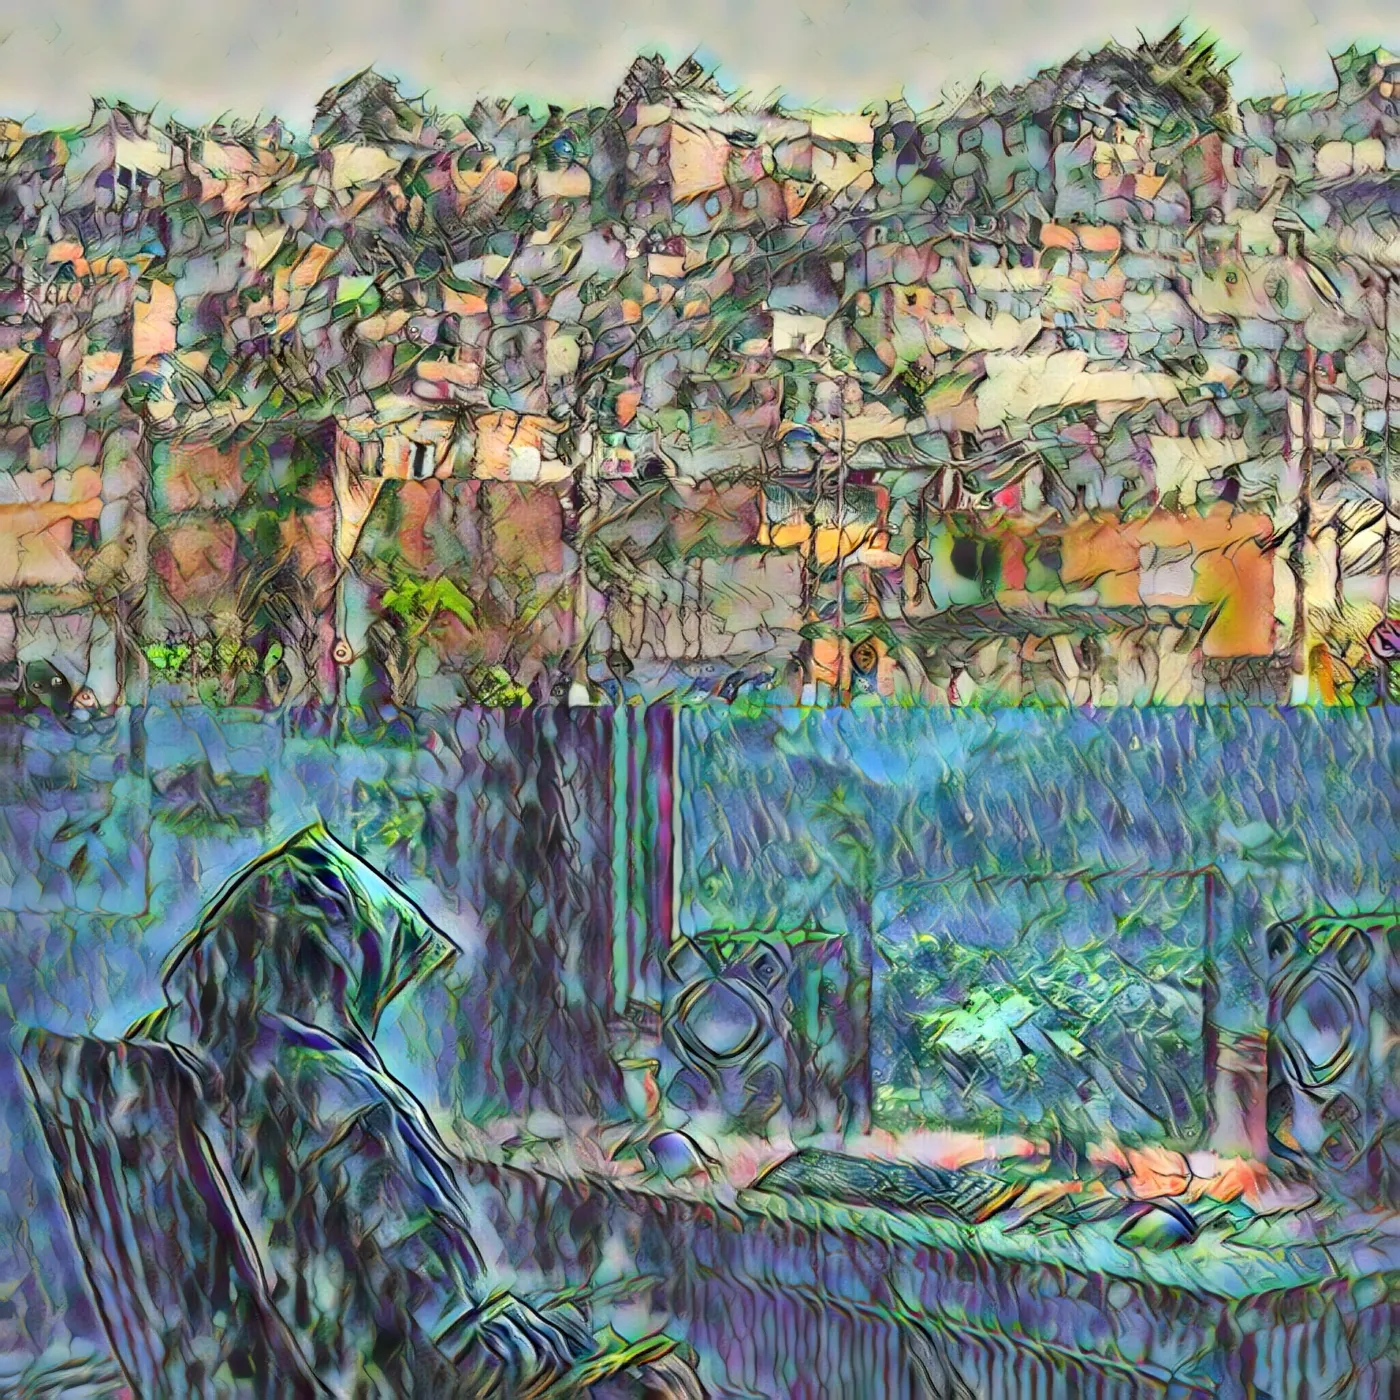 V_002 theleon and the favela